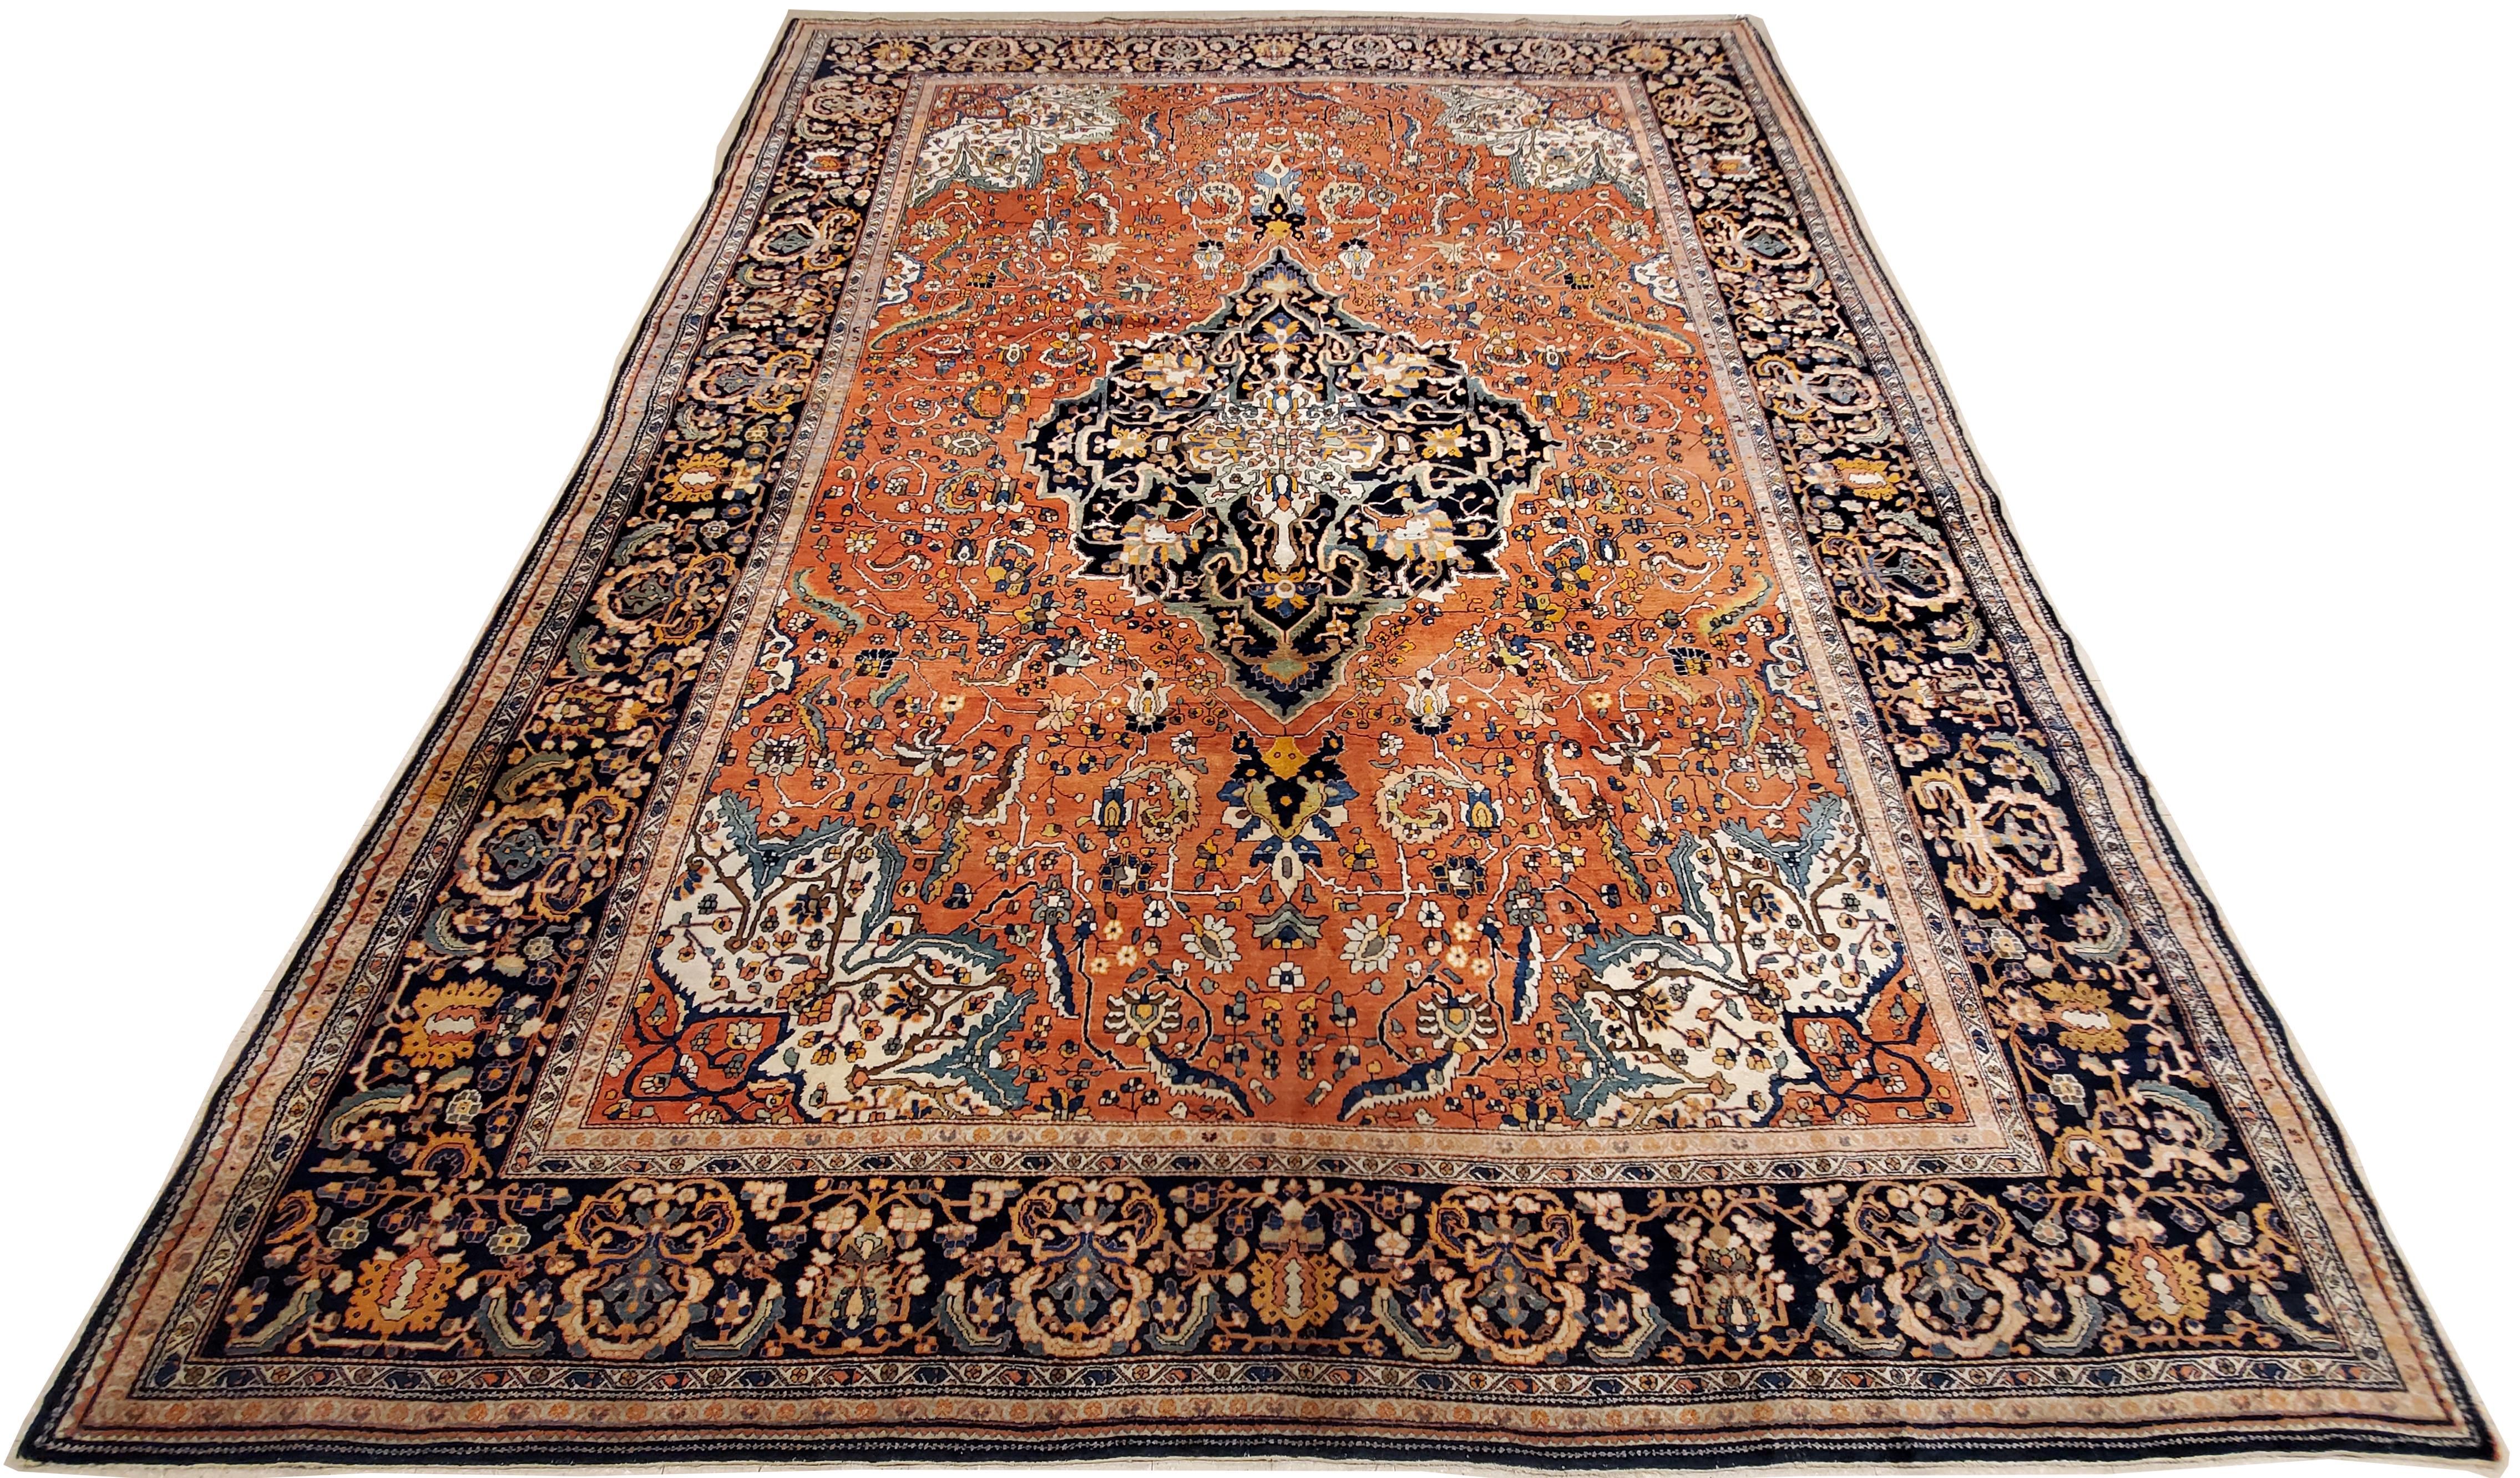 Finely woven Farahan Sarouks were produced in the late 19th century until just before world war I.

They have become extremely rare and are highly valued for their artistry and colors. This is a beautiful early 20th century example.

Rug measures: